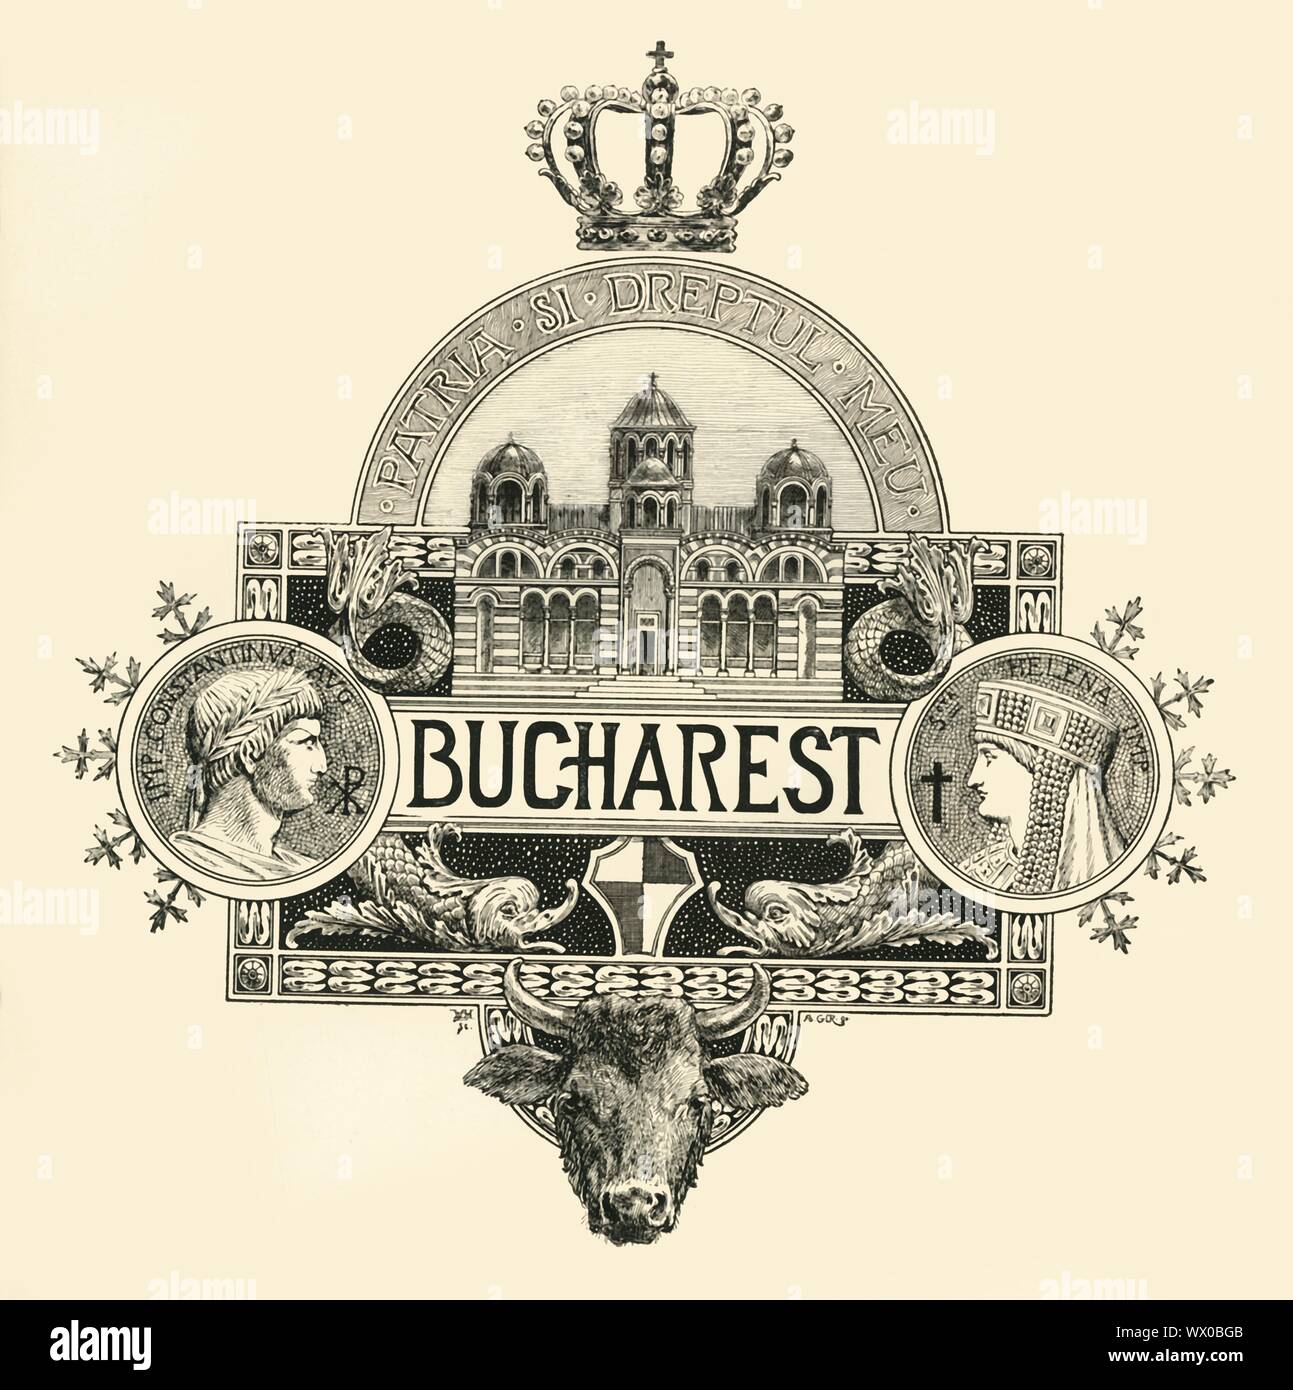 'Bucharest', late 19th-early 20th century. Decorative coat of arms for the city of Bucharest, capital of Romania, with the motto 'Patria Si Dreptul Meu', (The Homeland And My Right). Above is a pearl-encrusted crown, and below the motto is a Byzantine church, with dolphins flanking the central panel, and medallion portraits of Saints Constantine and Helena, the Roman emperor Constantine the Great (272-337 AD) and his mother Helena (c246-330 AD). At the bottom is a bull's head. Stock Photo